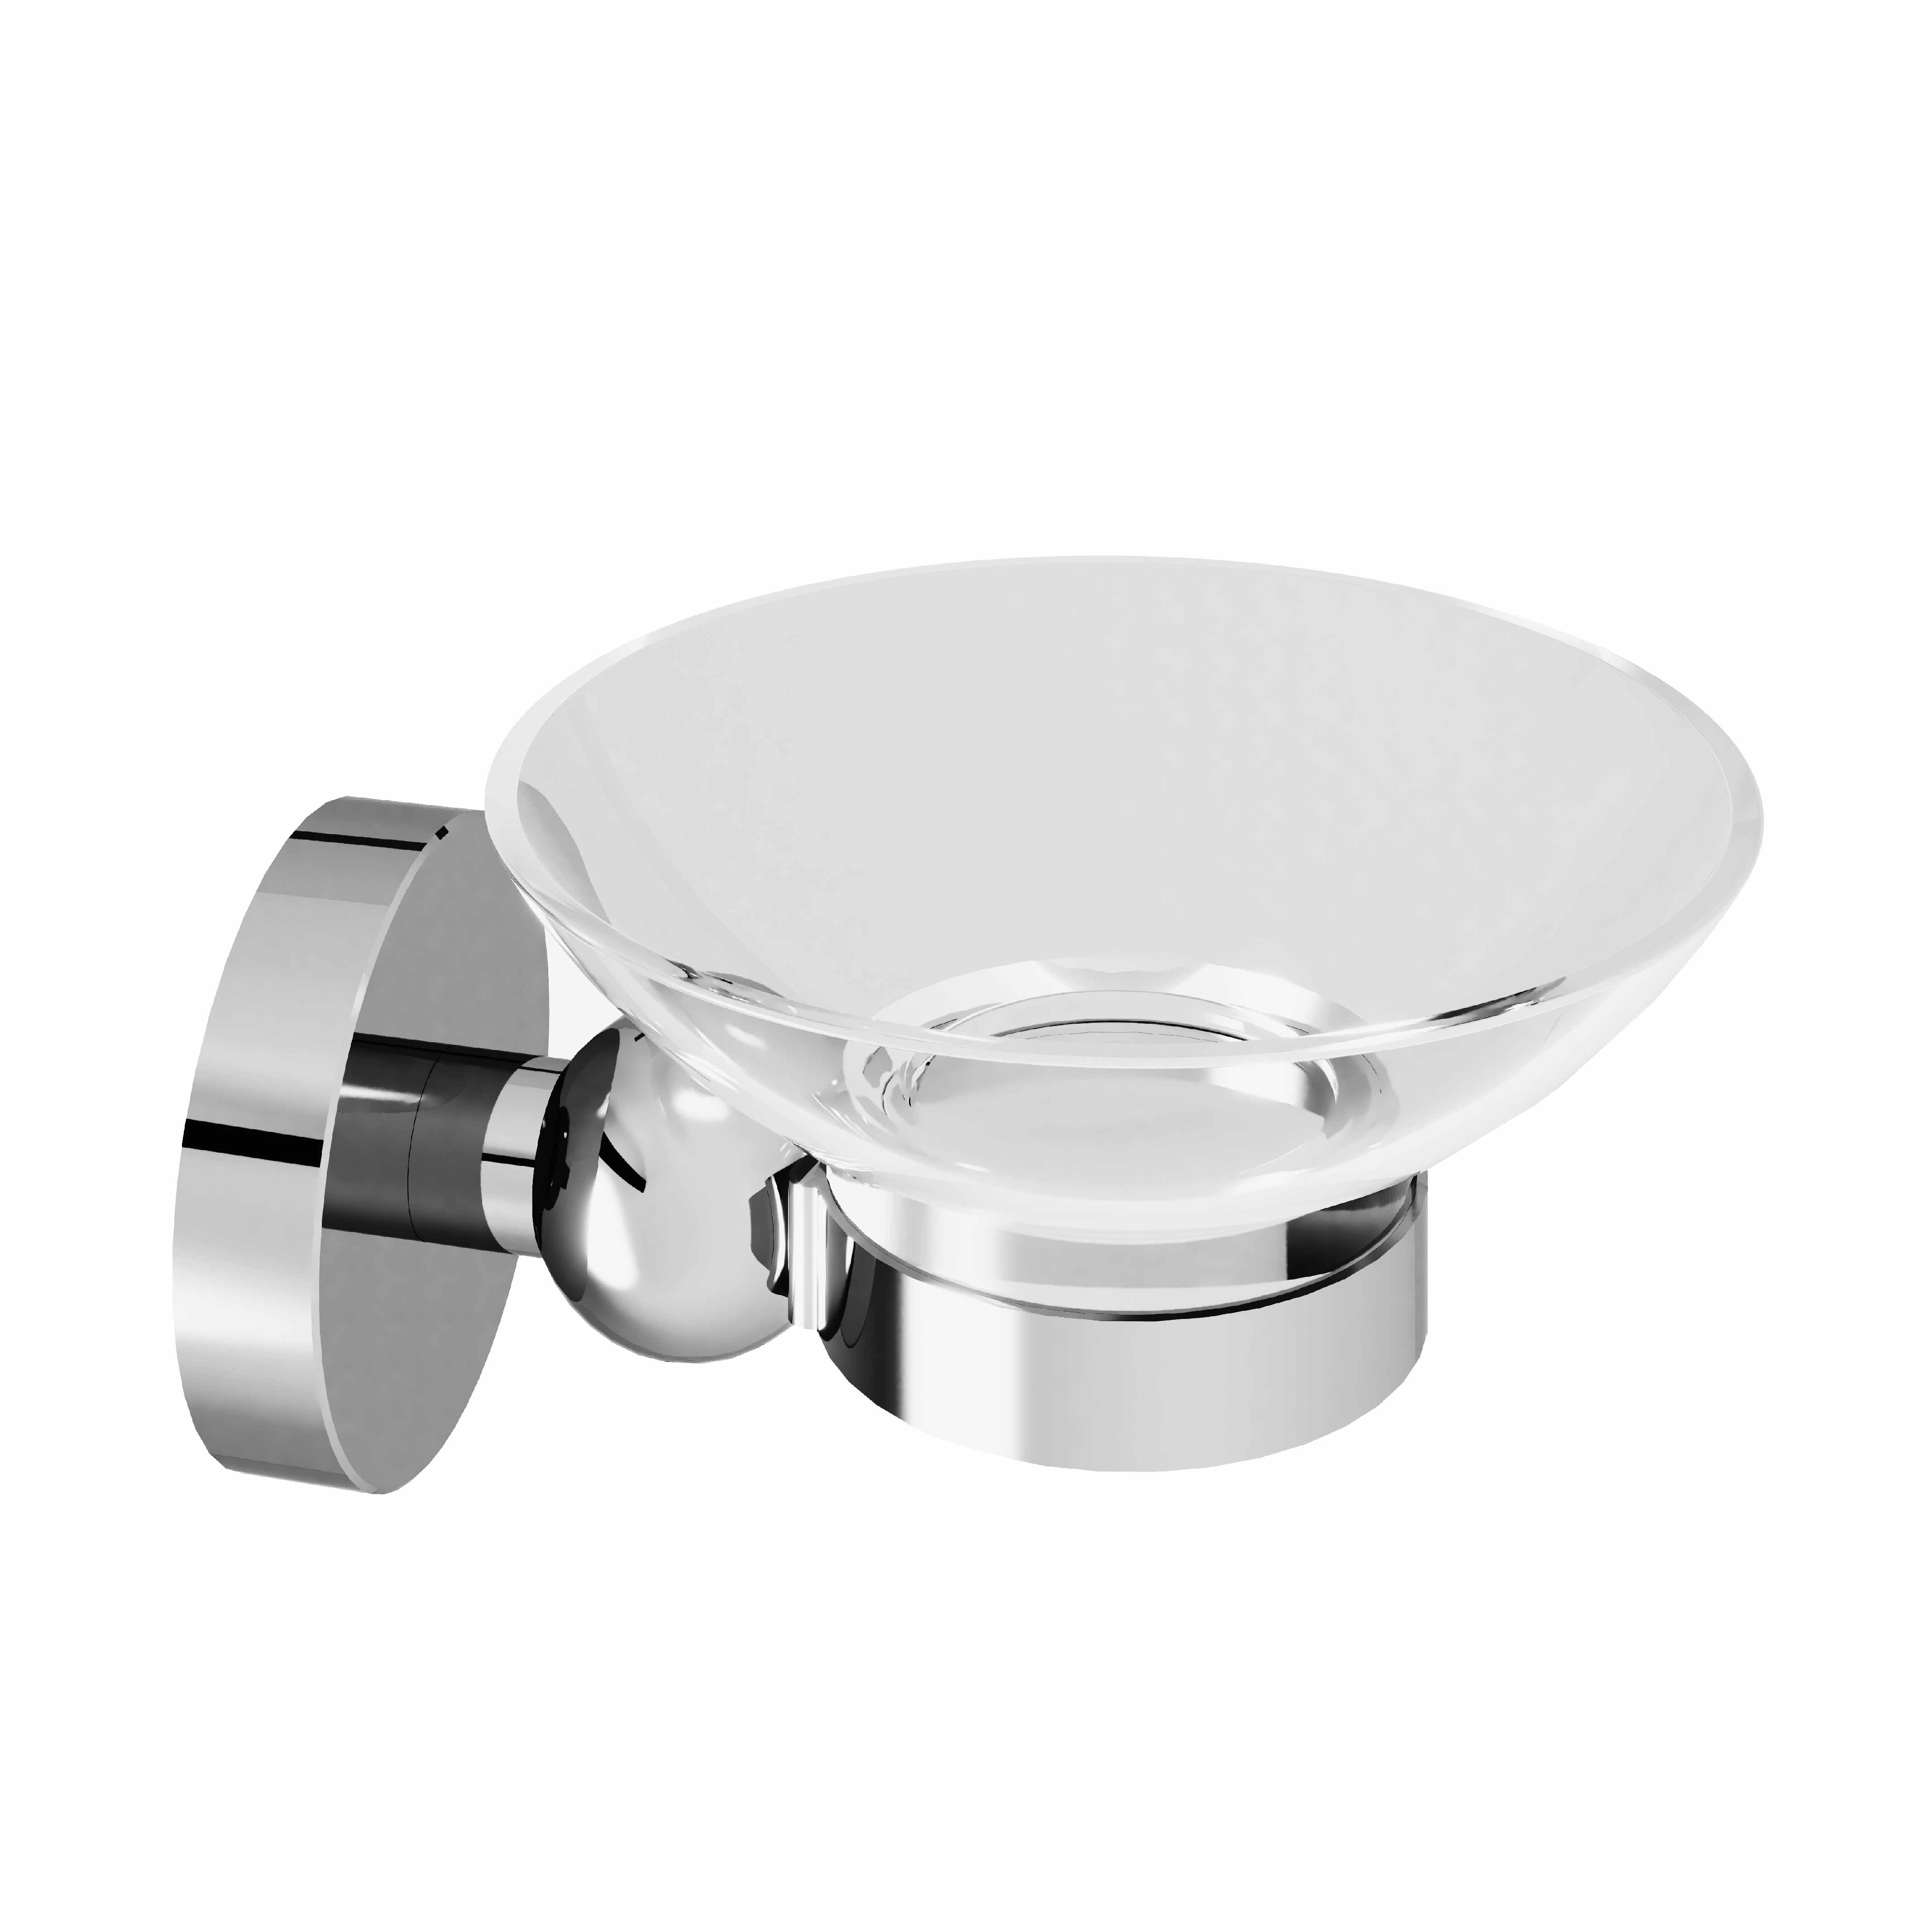 M91-515 Wall mounted soap dish holder